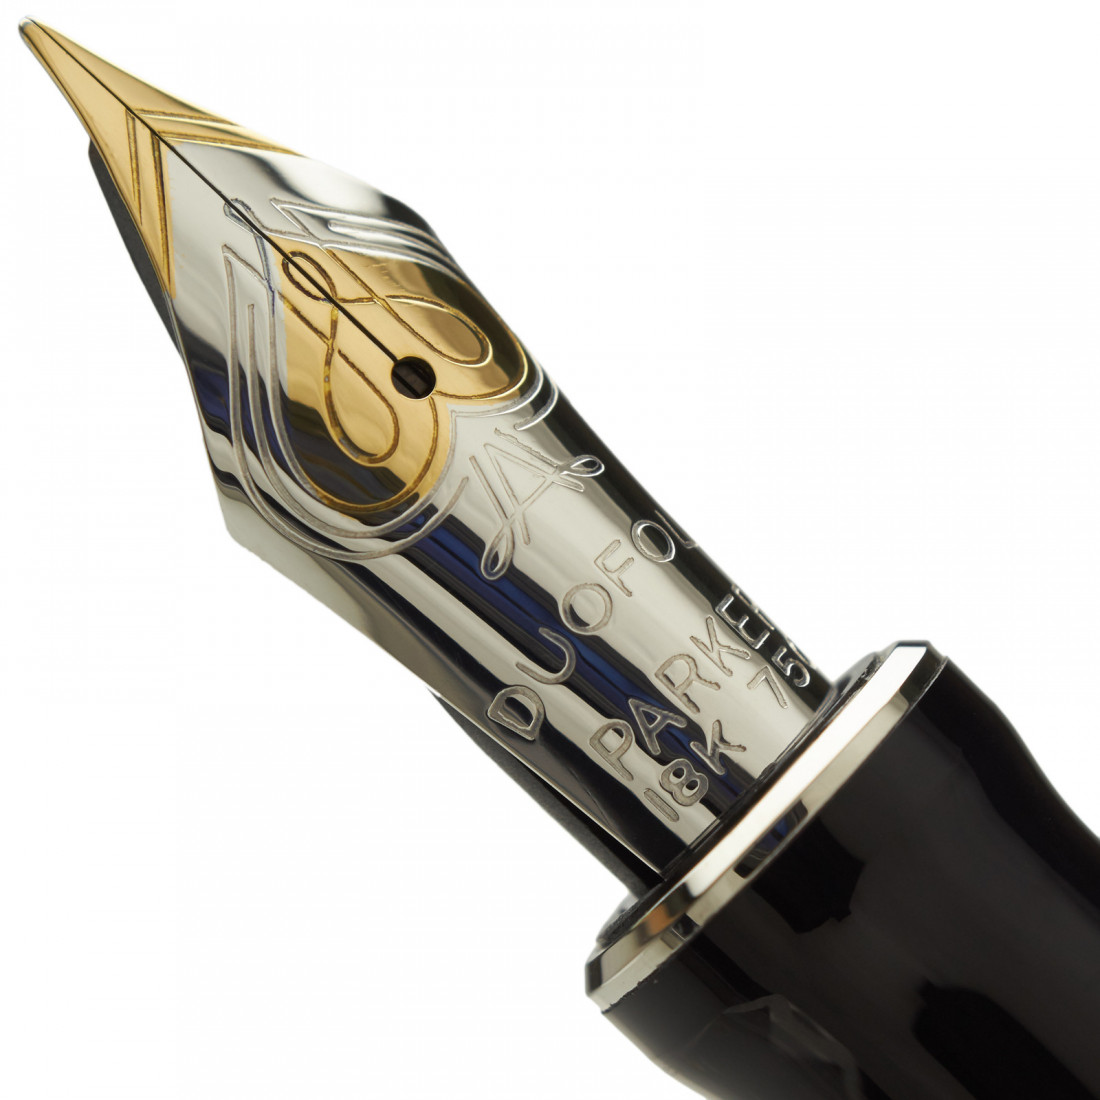 Parker Duofold Centennial Fountain Pen, Classic Black with Gold Trim, Solid Gold Nib, Black Ink and Converter (1931381)